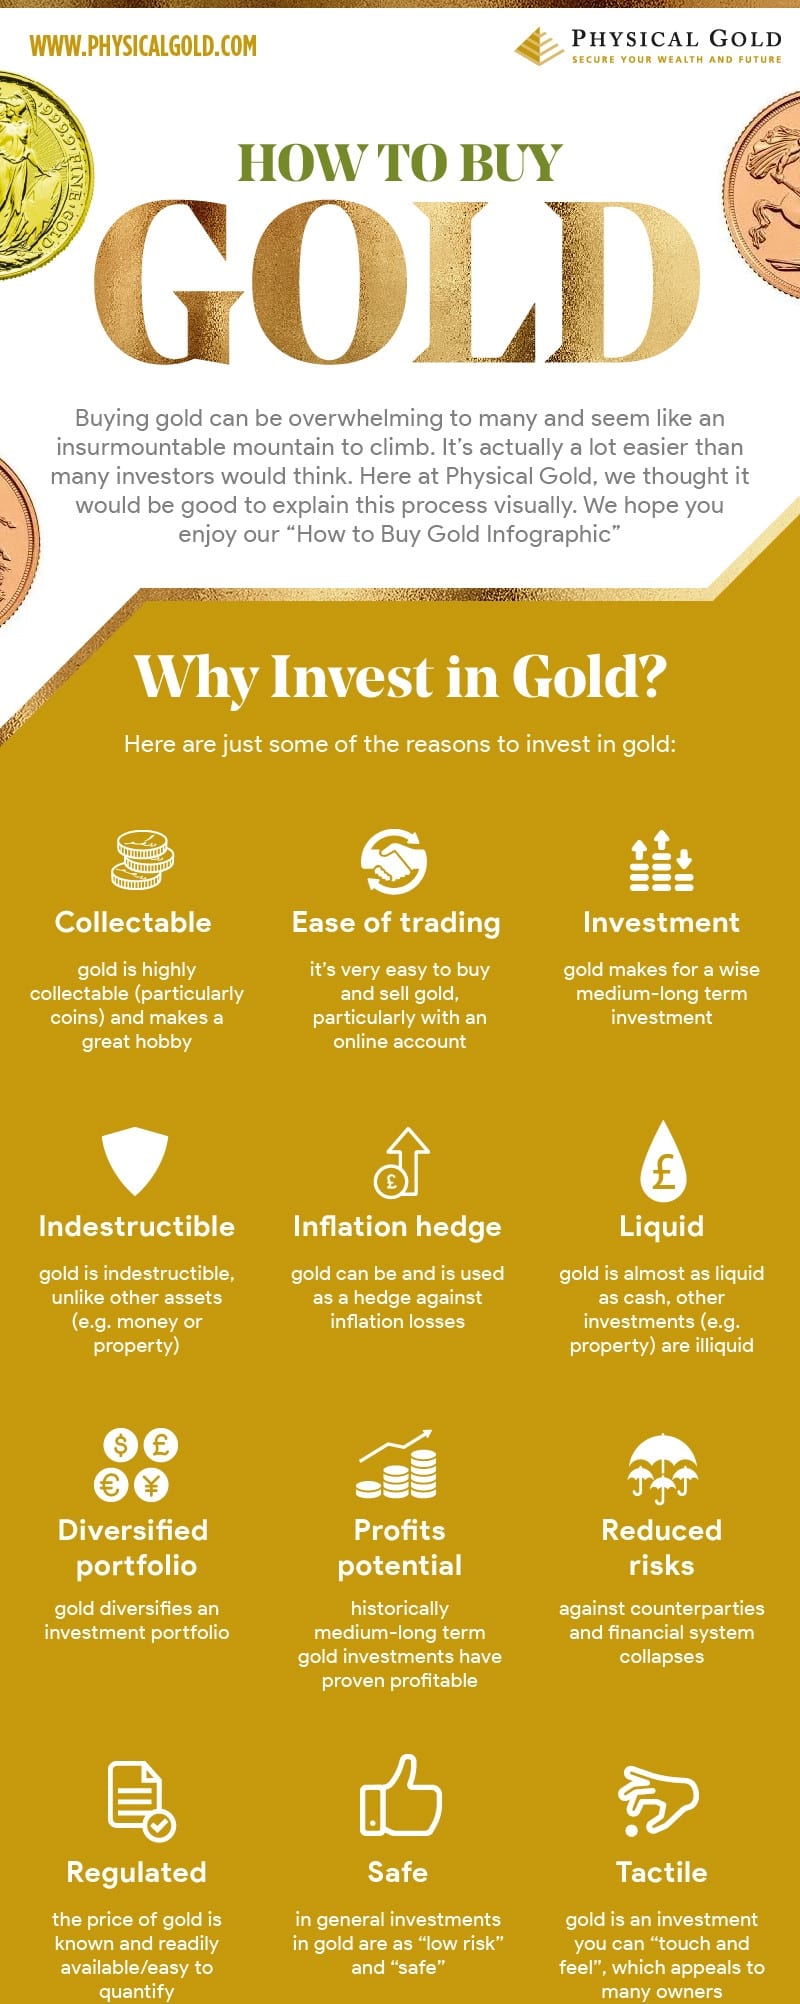 How To Buy Gold Online - 5 Step Guide - PhysicalGold.com